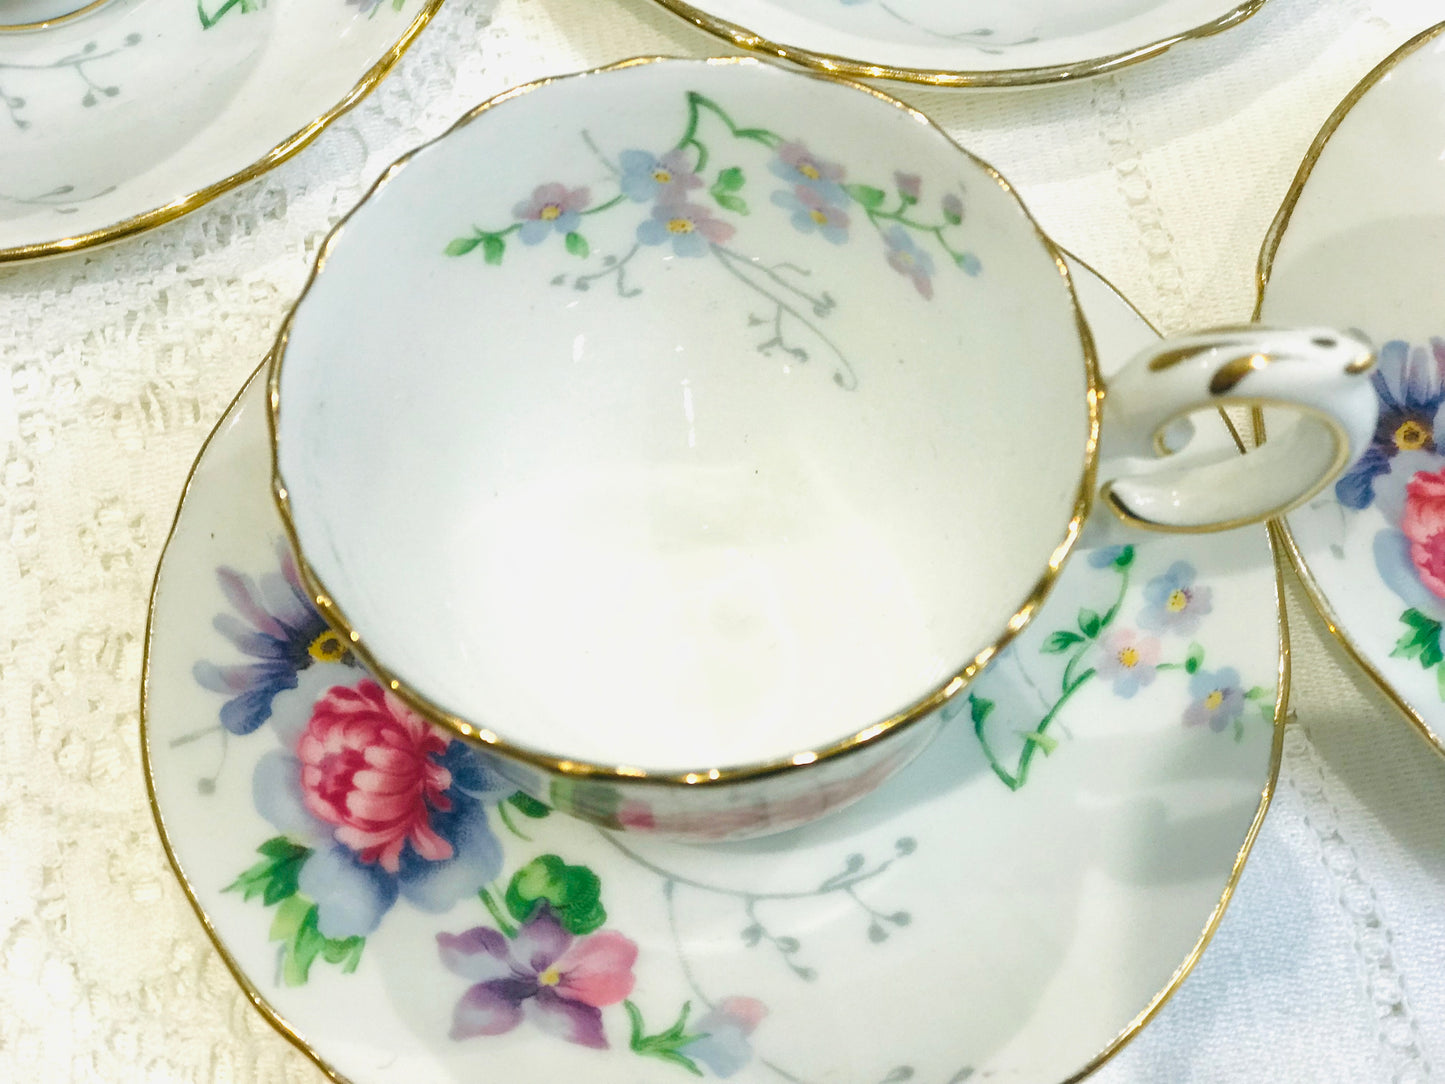 Crown Staffordshire Cup & Saucer